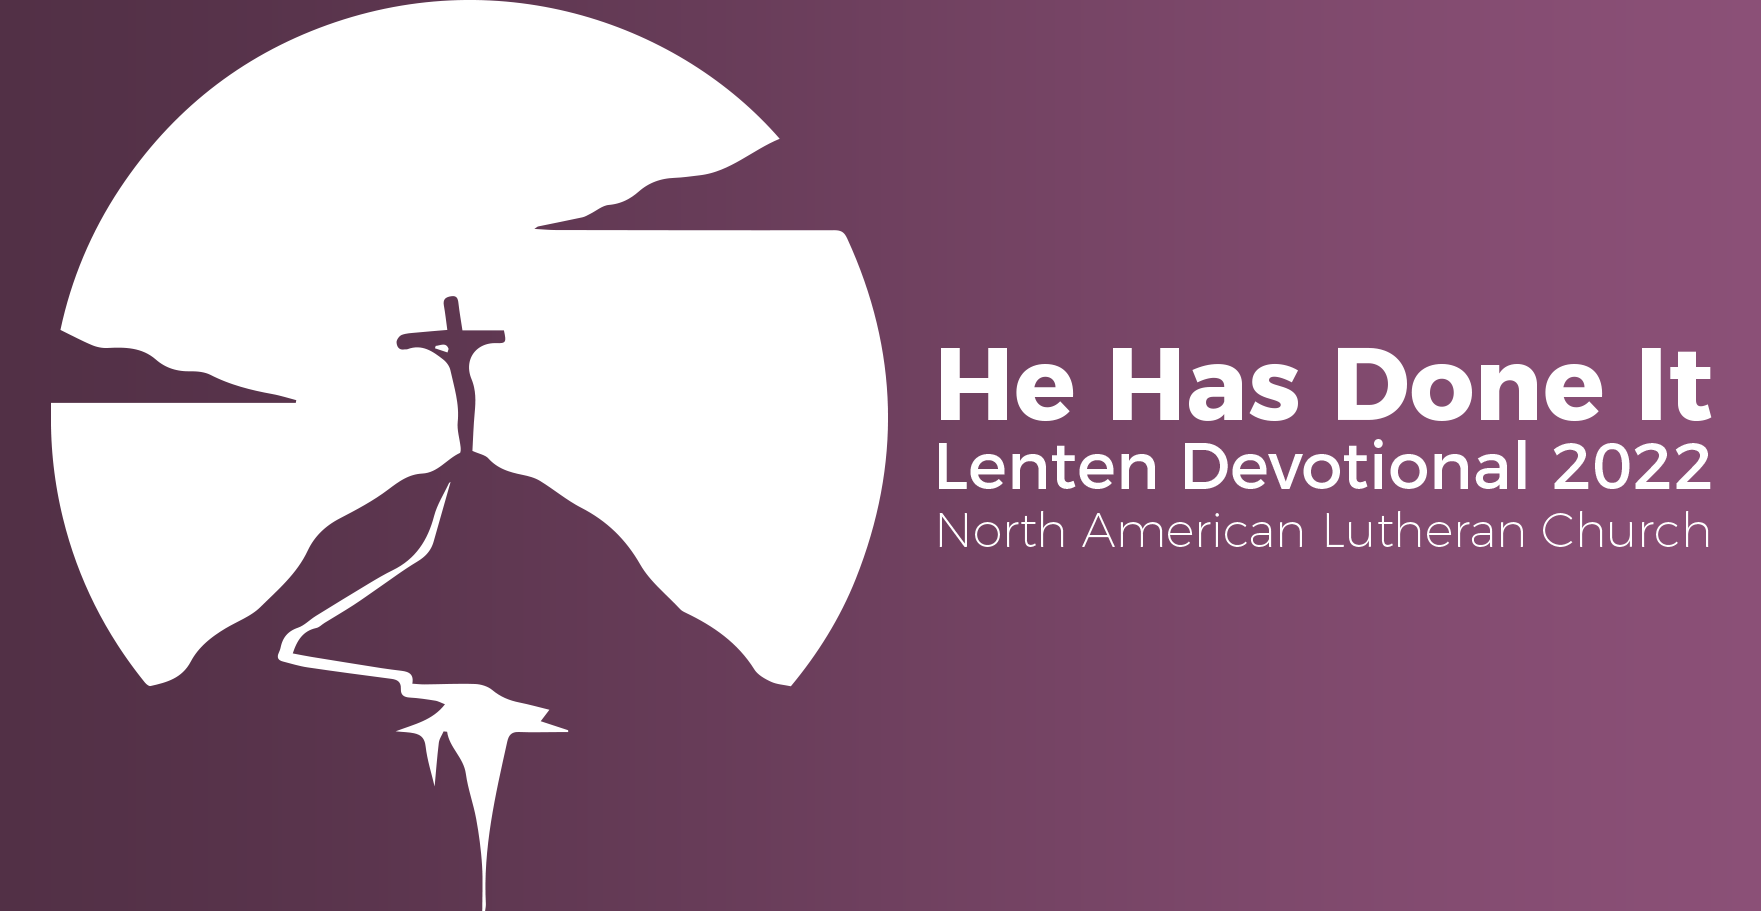 March 24, 2022 | Thursday of the Week of Lent III